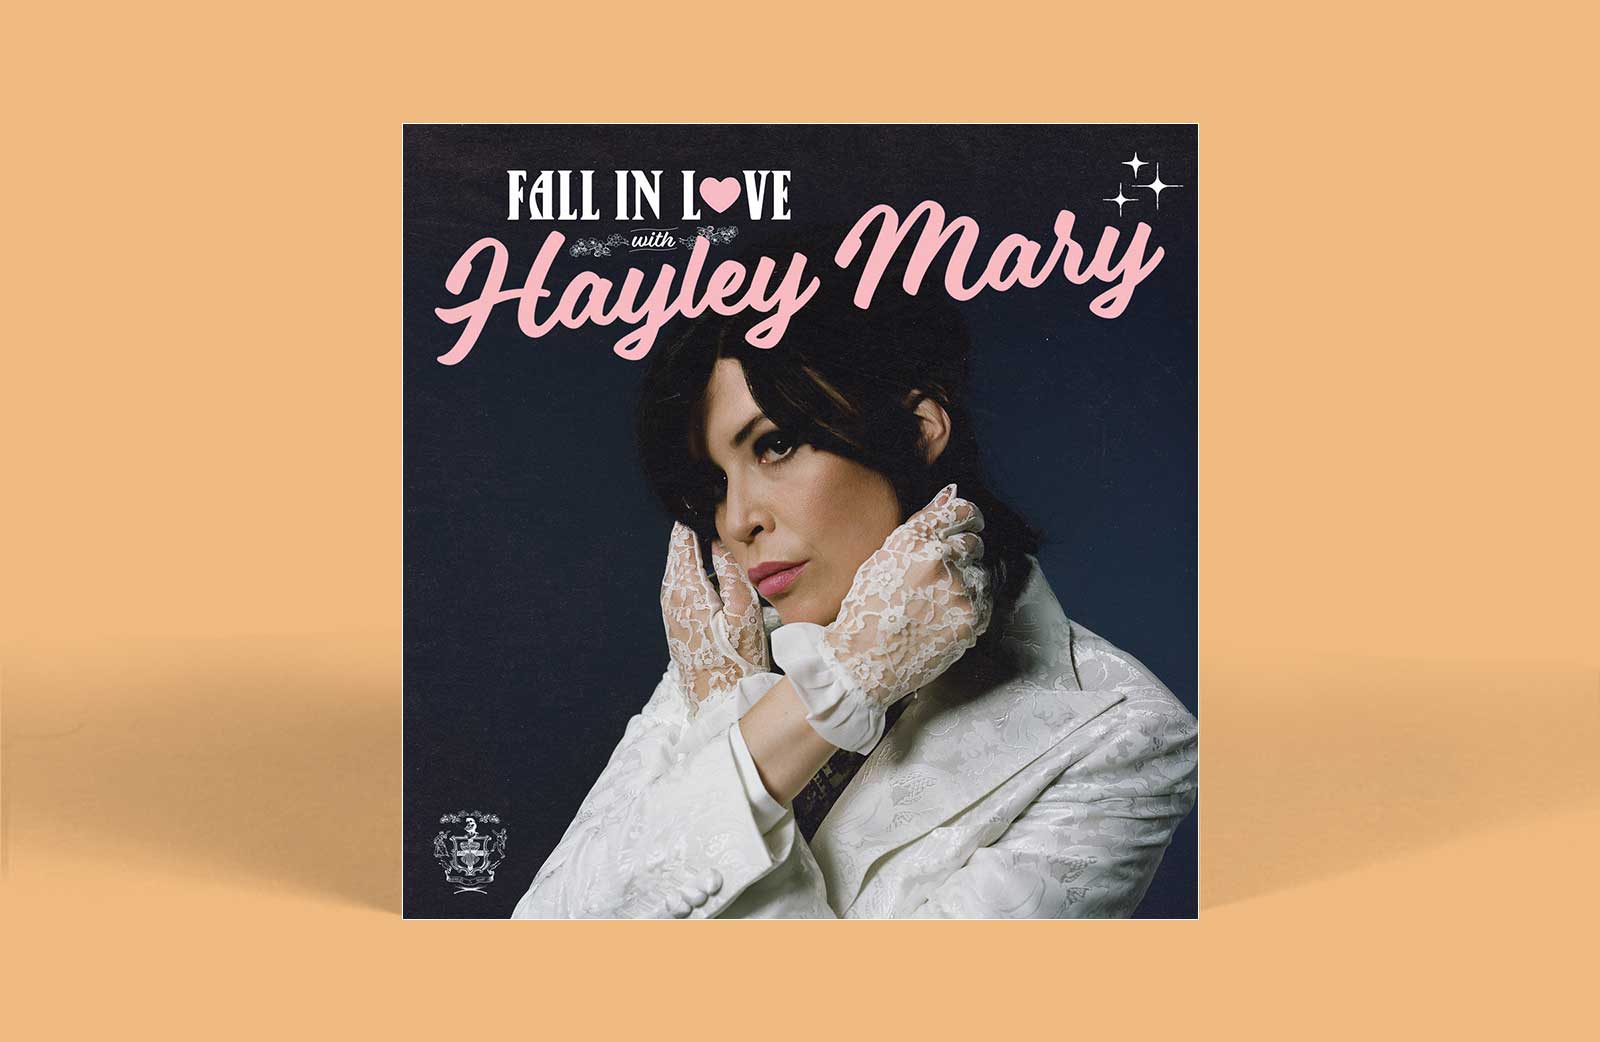 Haley Mary Fall in Love